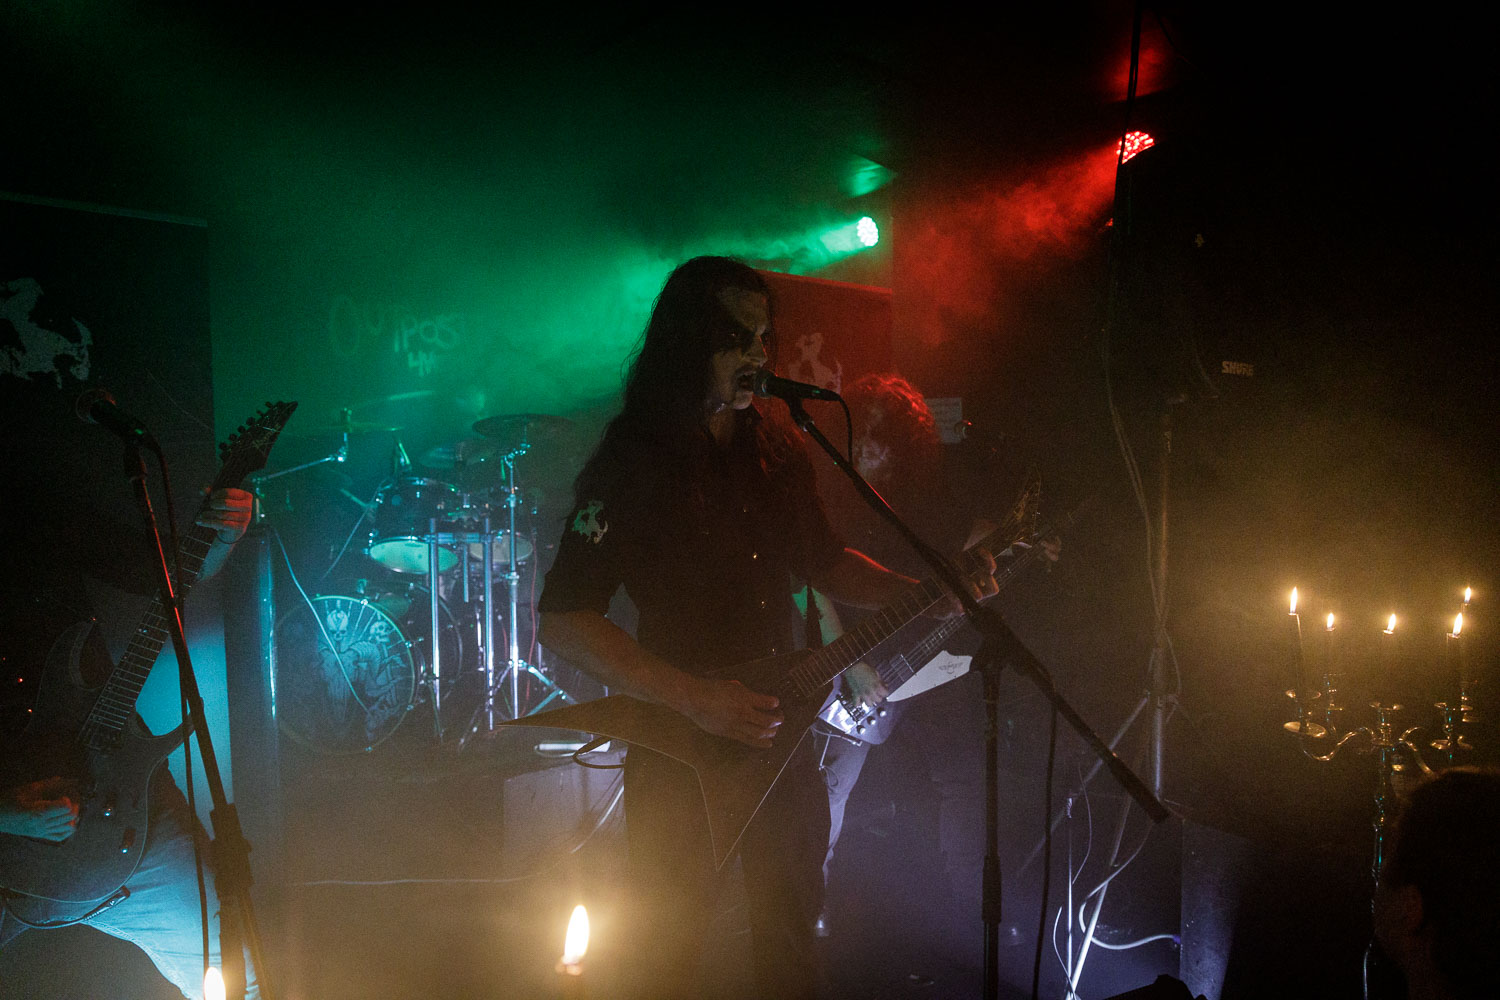 Necronautical at The Outpost in Liverpool on July 11th 2019 